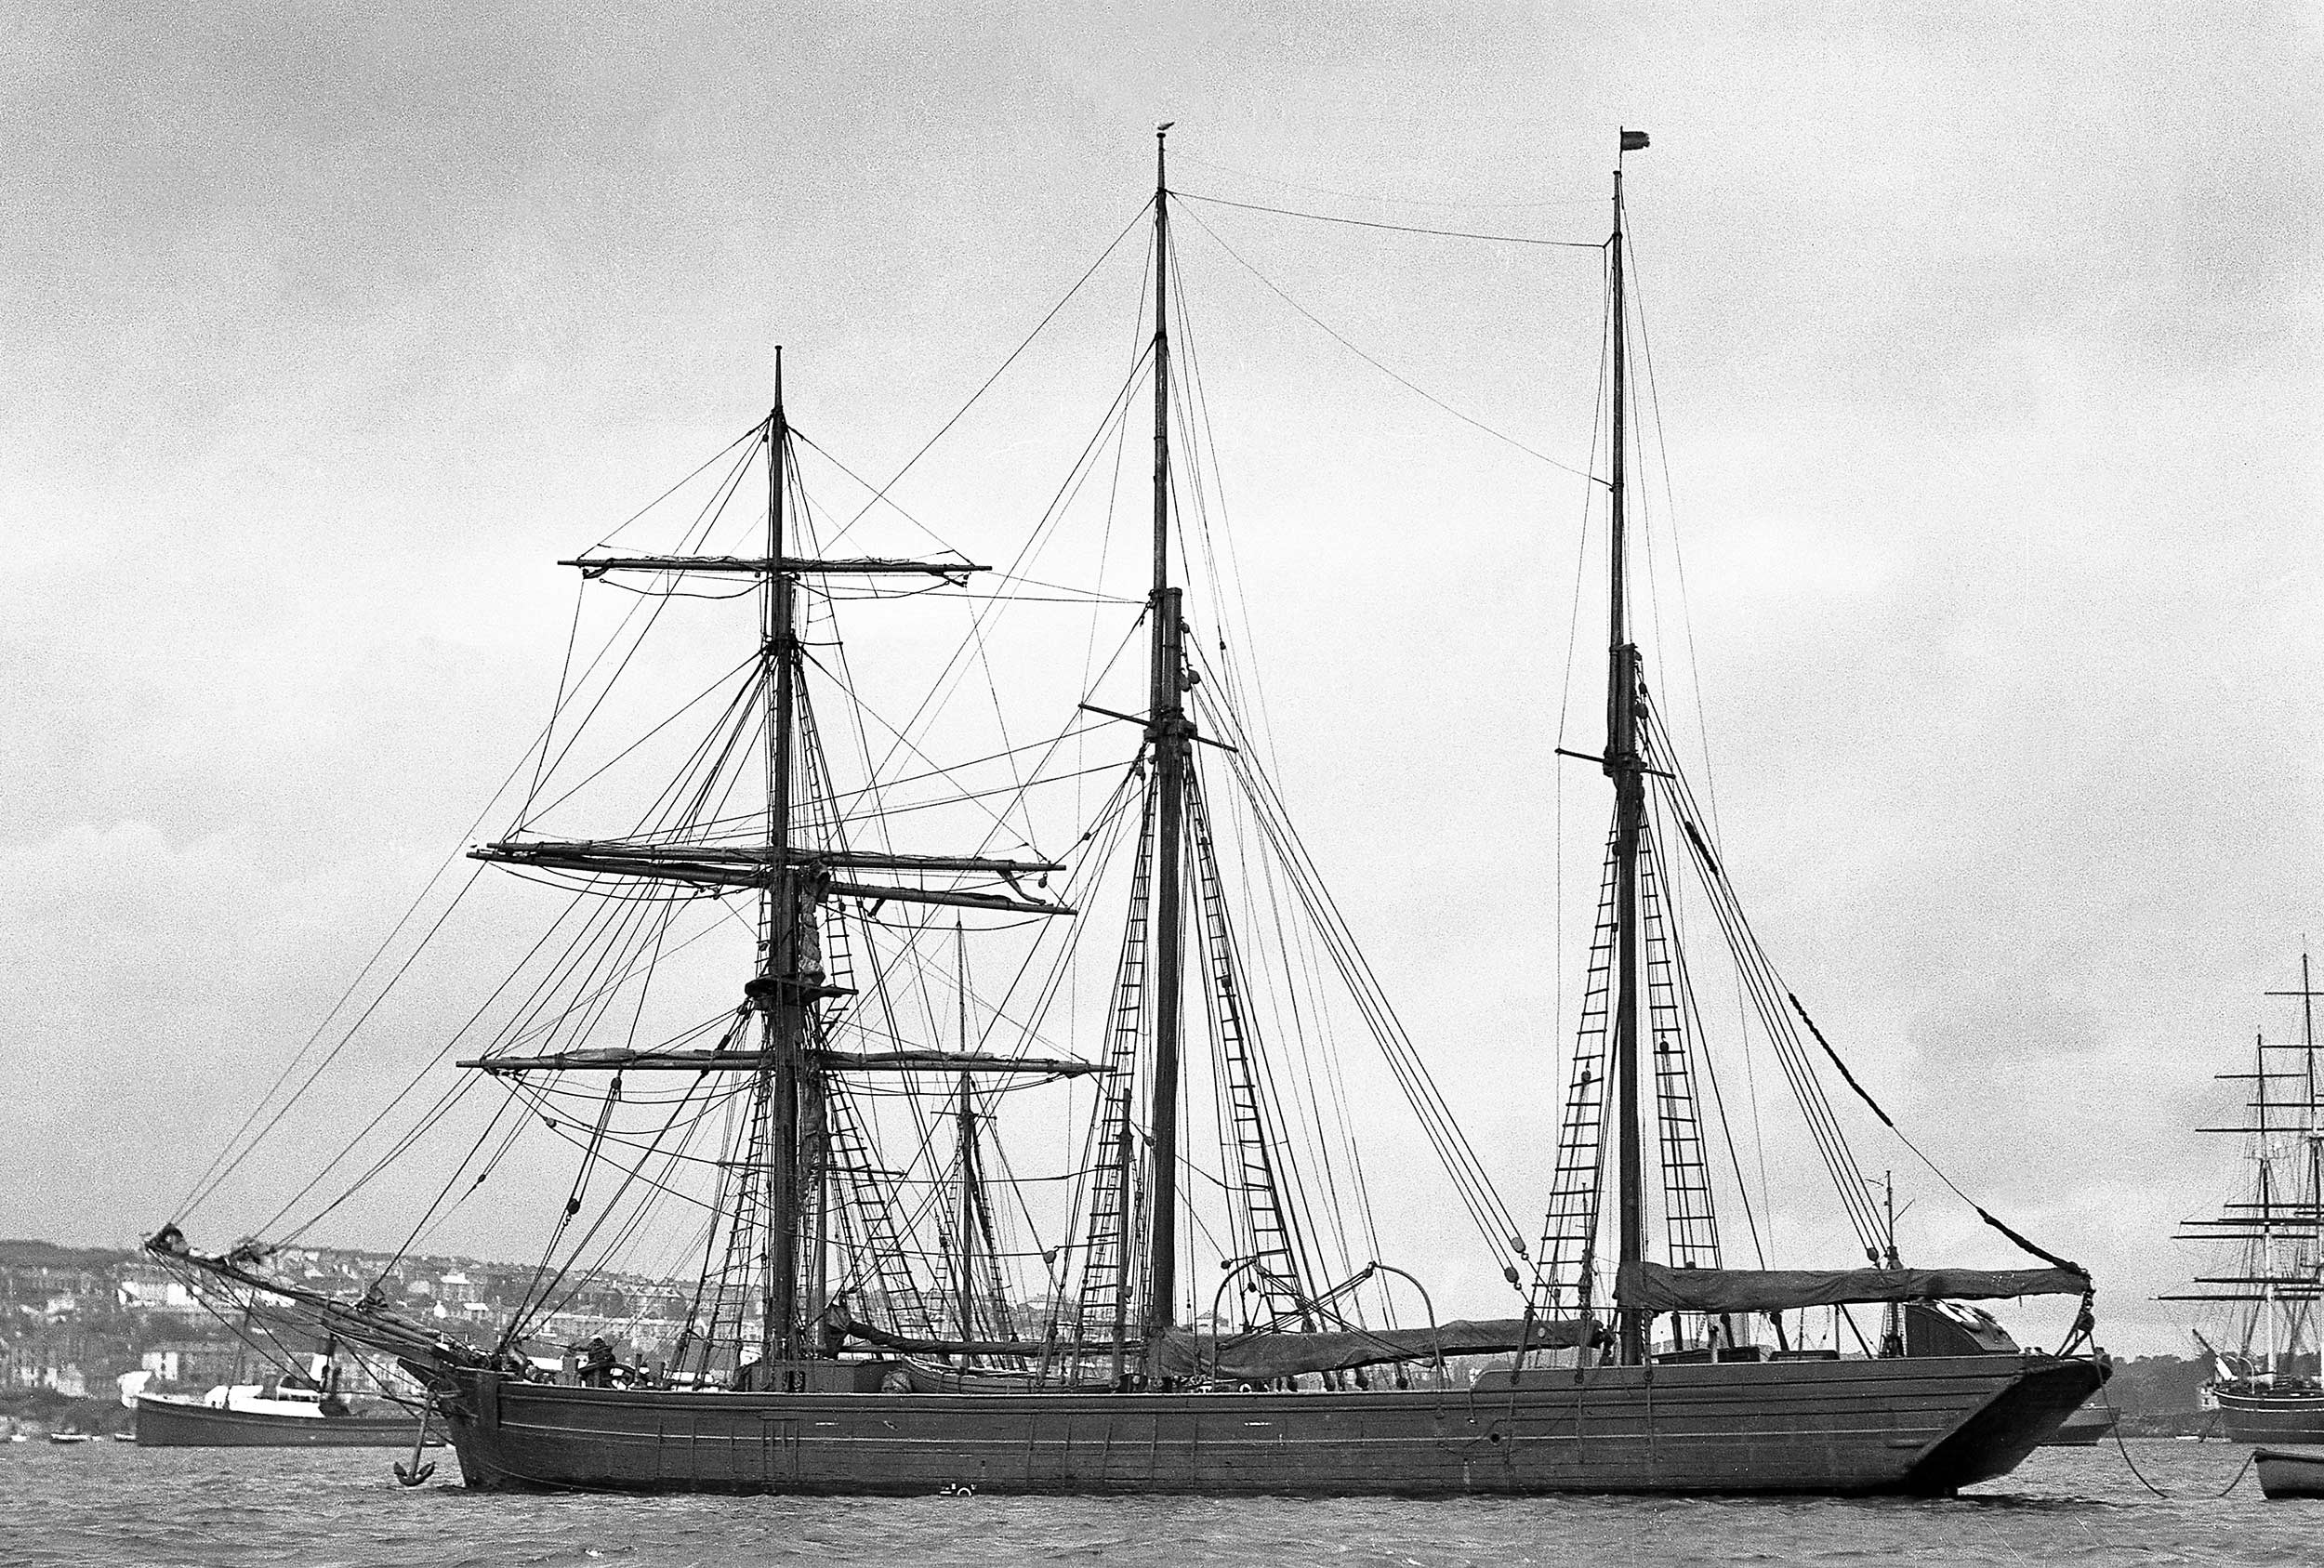 Black and white photo of the barquentine 'Waterwitch' in Falmouth harbour.